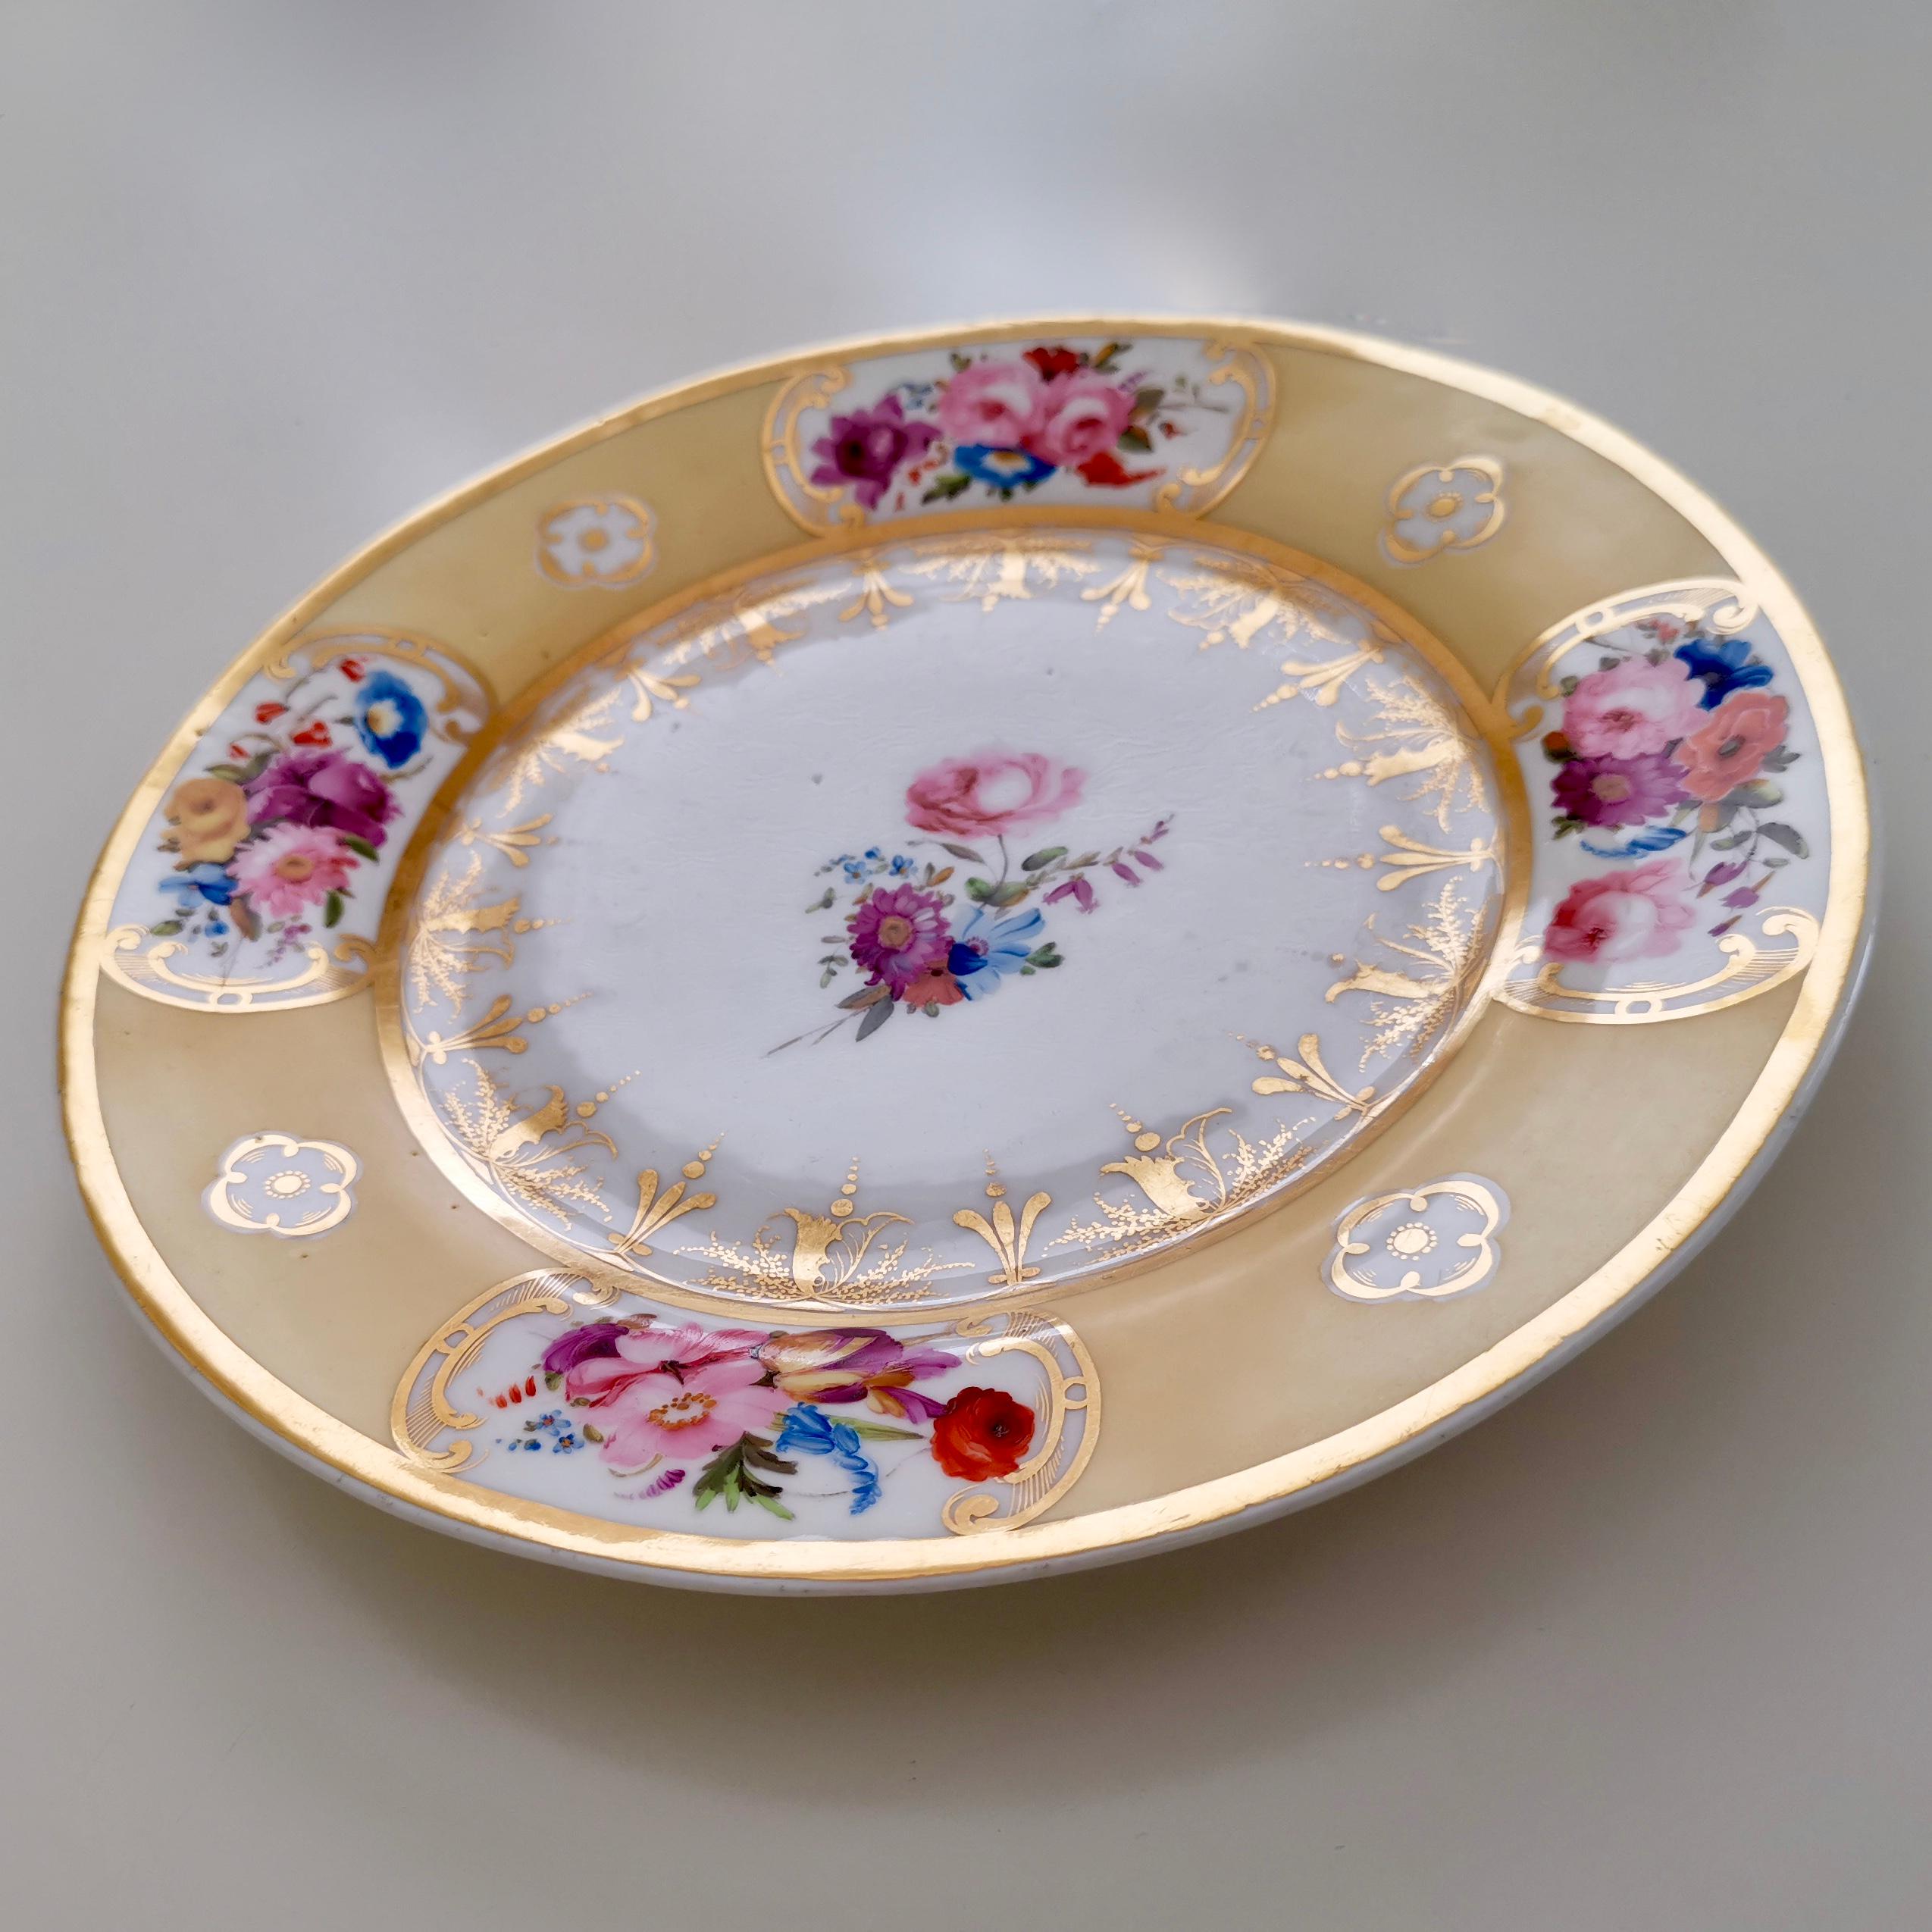 Porcelain Coalport Plate, Yellow Ground with Hand Painted Flowers, circa 1820